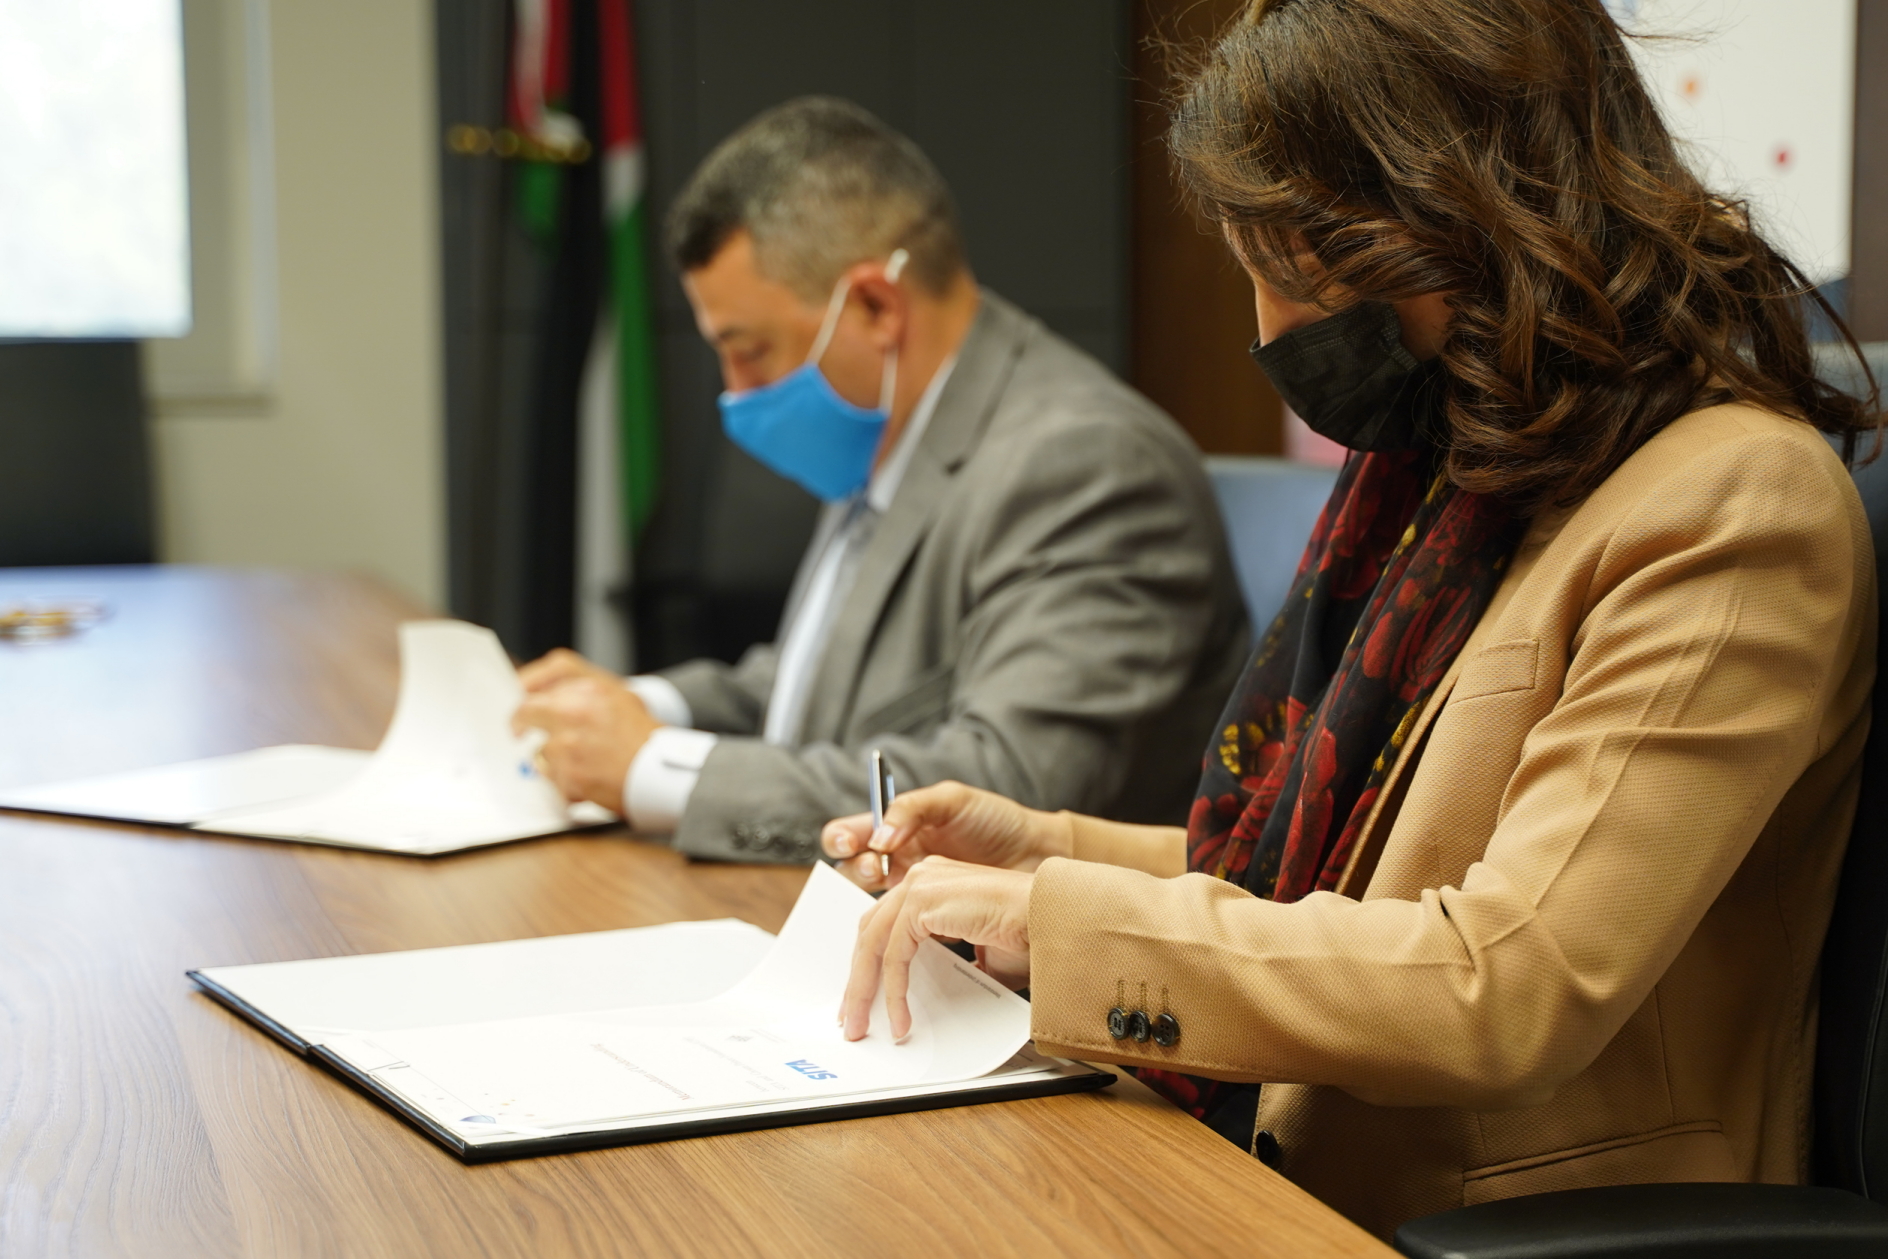 Dr. Tamam Mango, CEO of the Crown Prince Foundation, and Mr. Hani El-Assaad, SITA President - MEA, sign the MOU, opening the door to new career opportunities in Jordan. Click to enlarge.